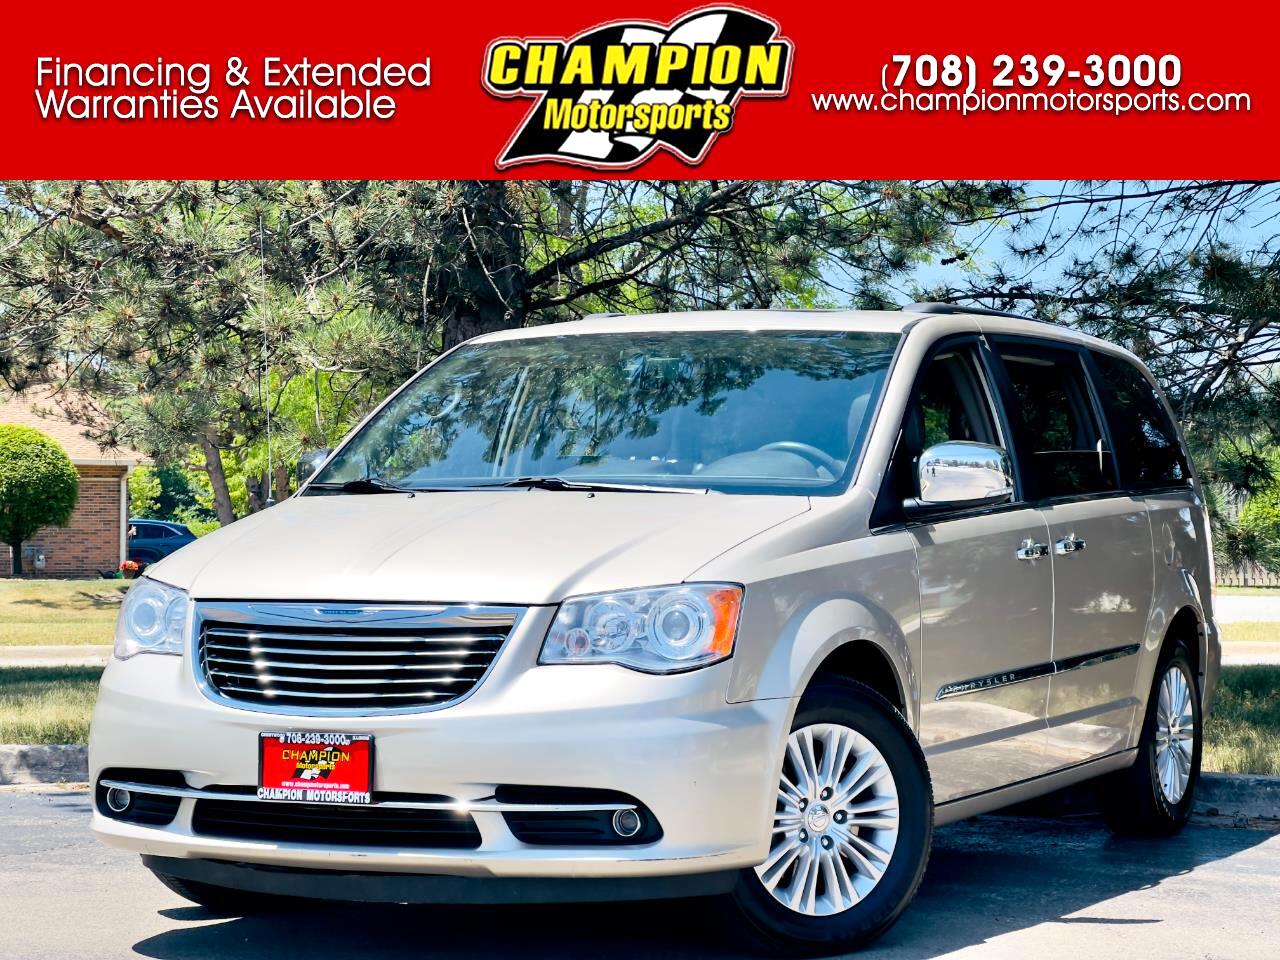 2014 Chrysler Town & Country 4dr Wgn Limited